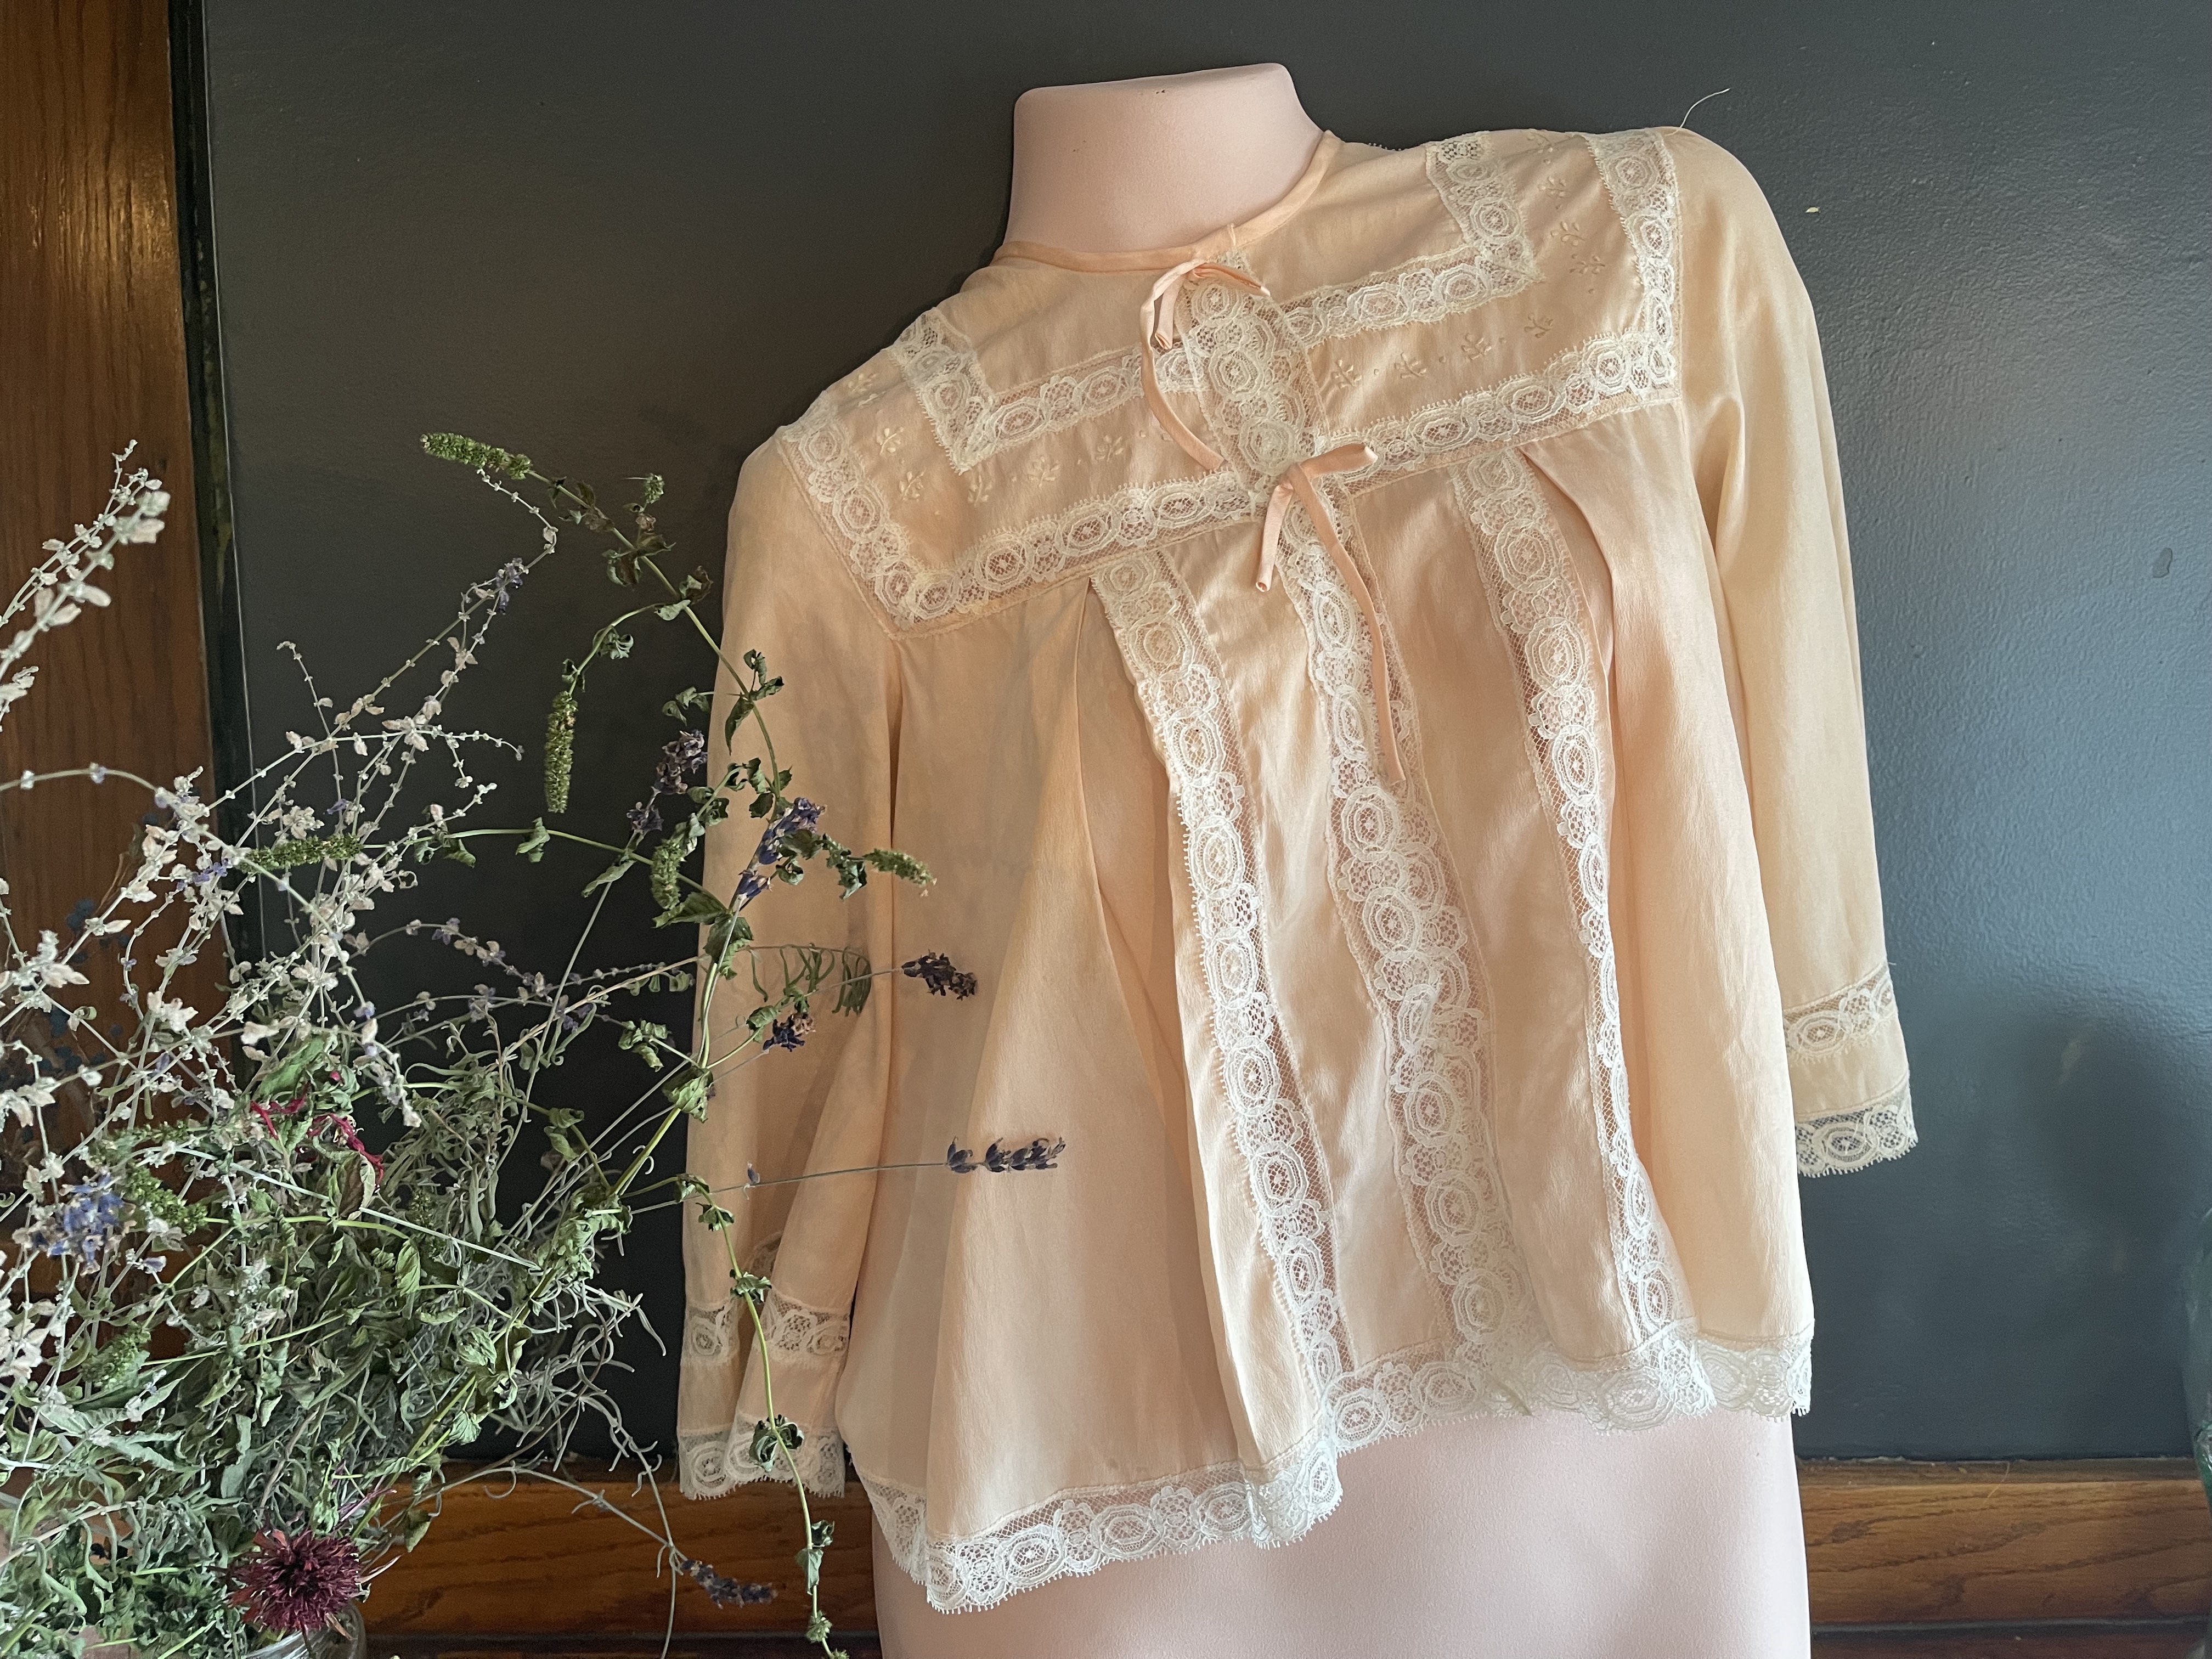 AUTHOR PHOTO's of a PLASTER NUDE vintage lace top